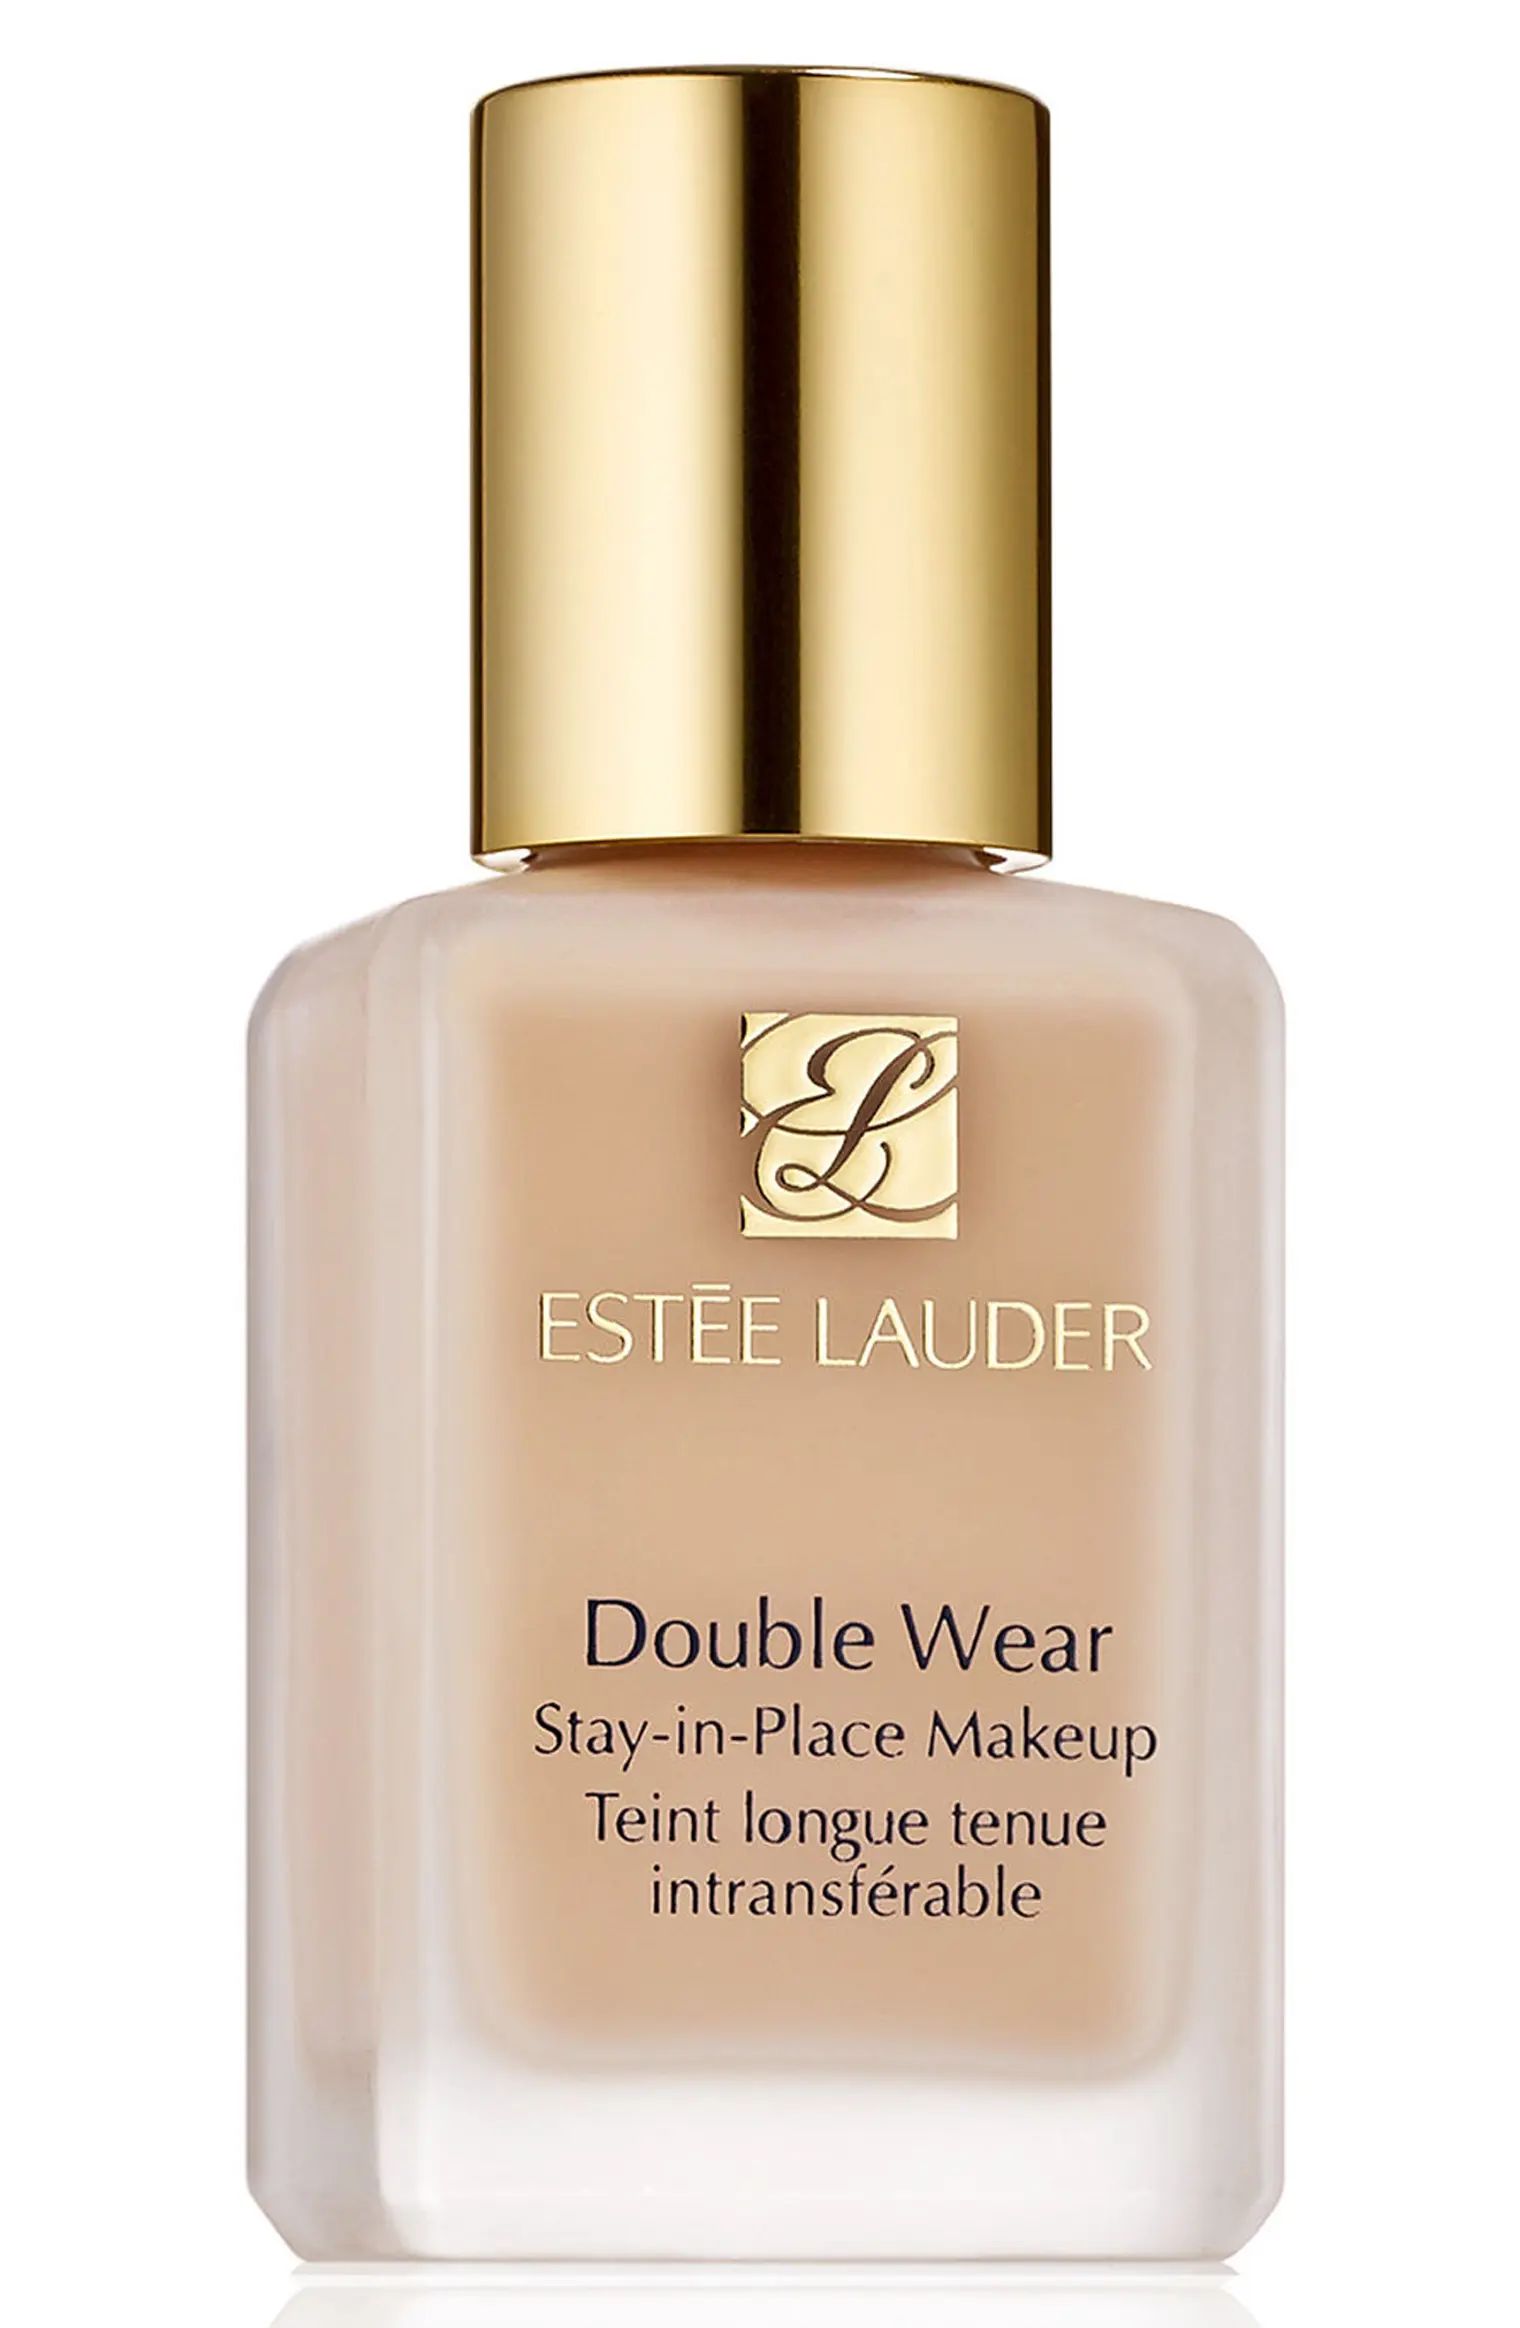 Rating 4.8out of5stars(4.4K)4366Double Wear Stay-in-Place Liquid MakeupESTÉE LAUDER | Nordstrom